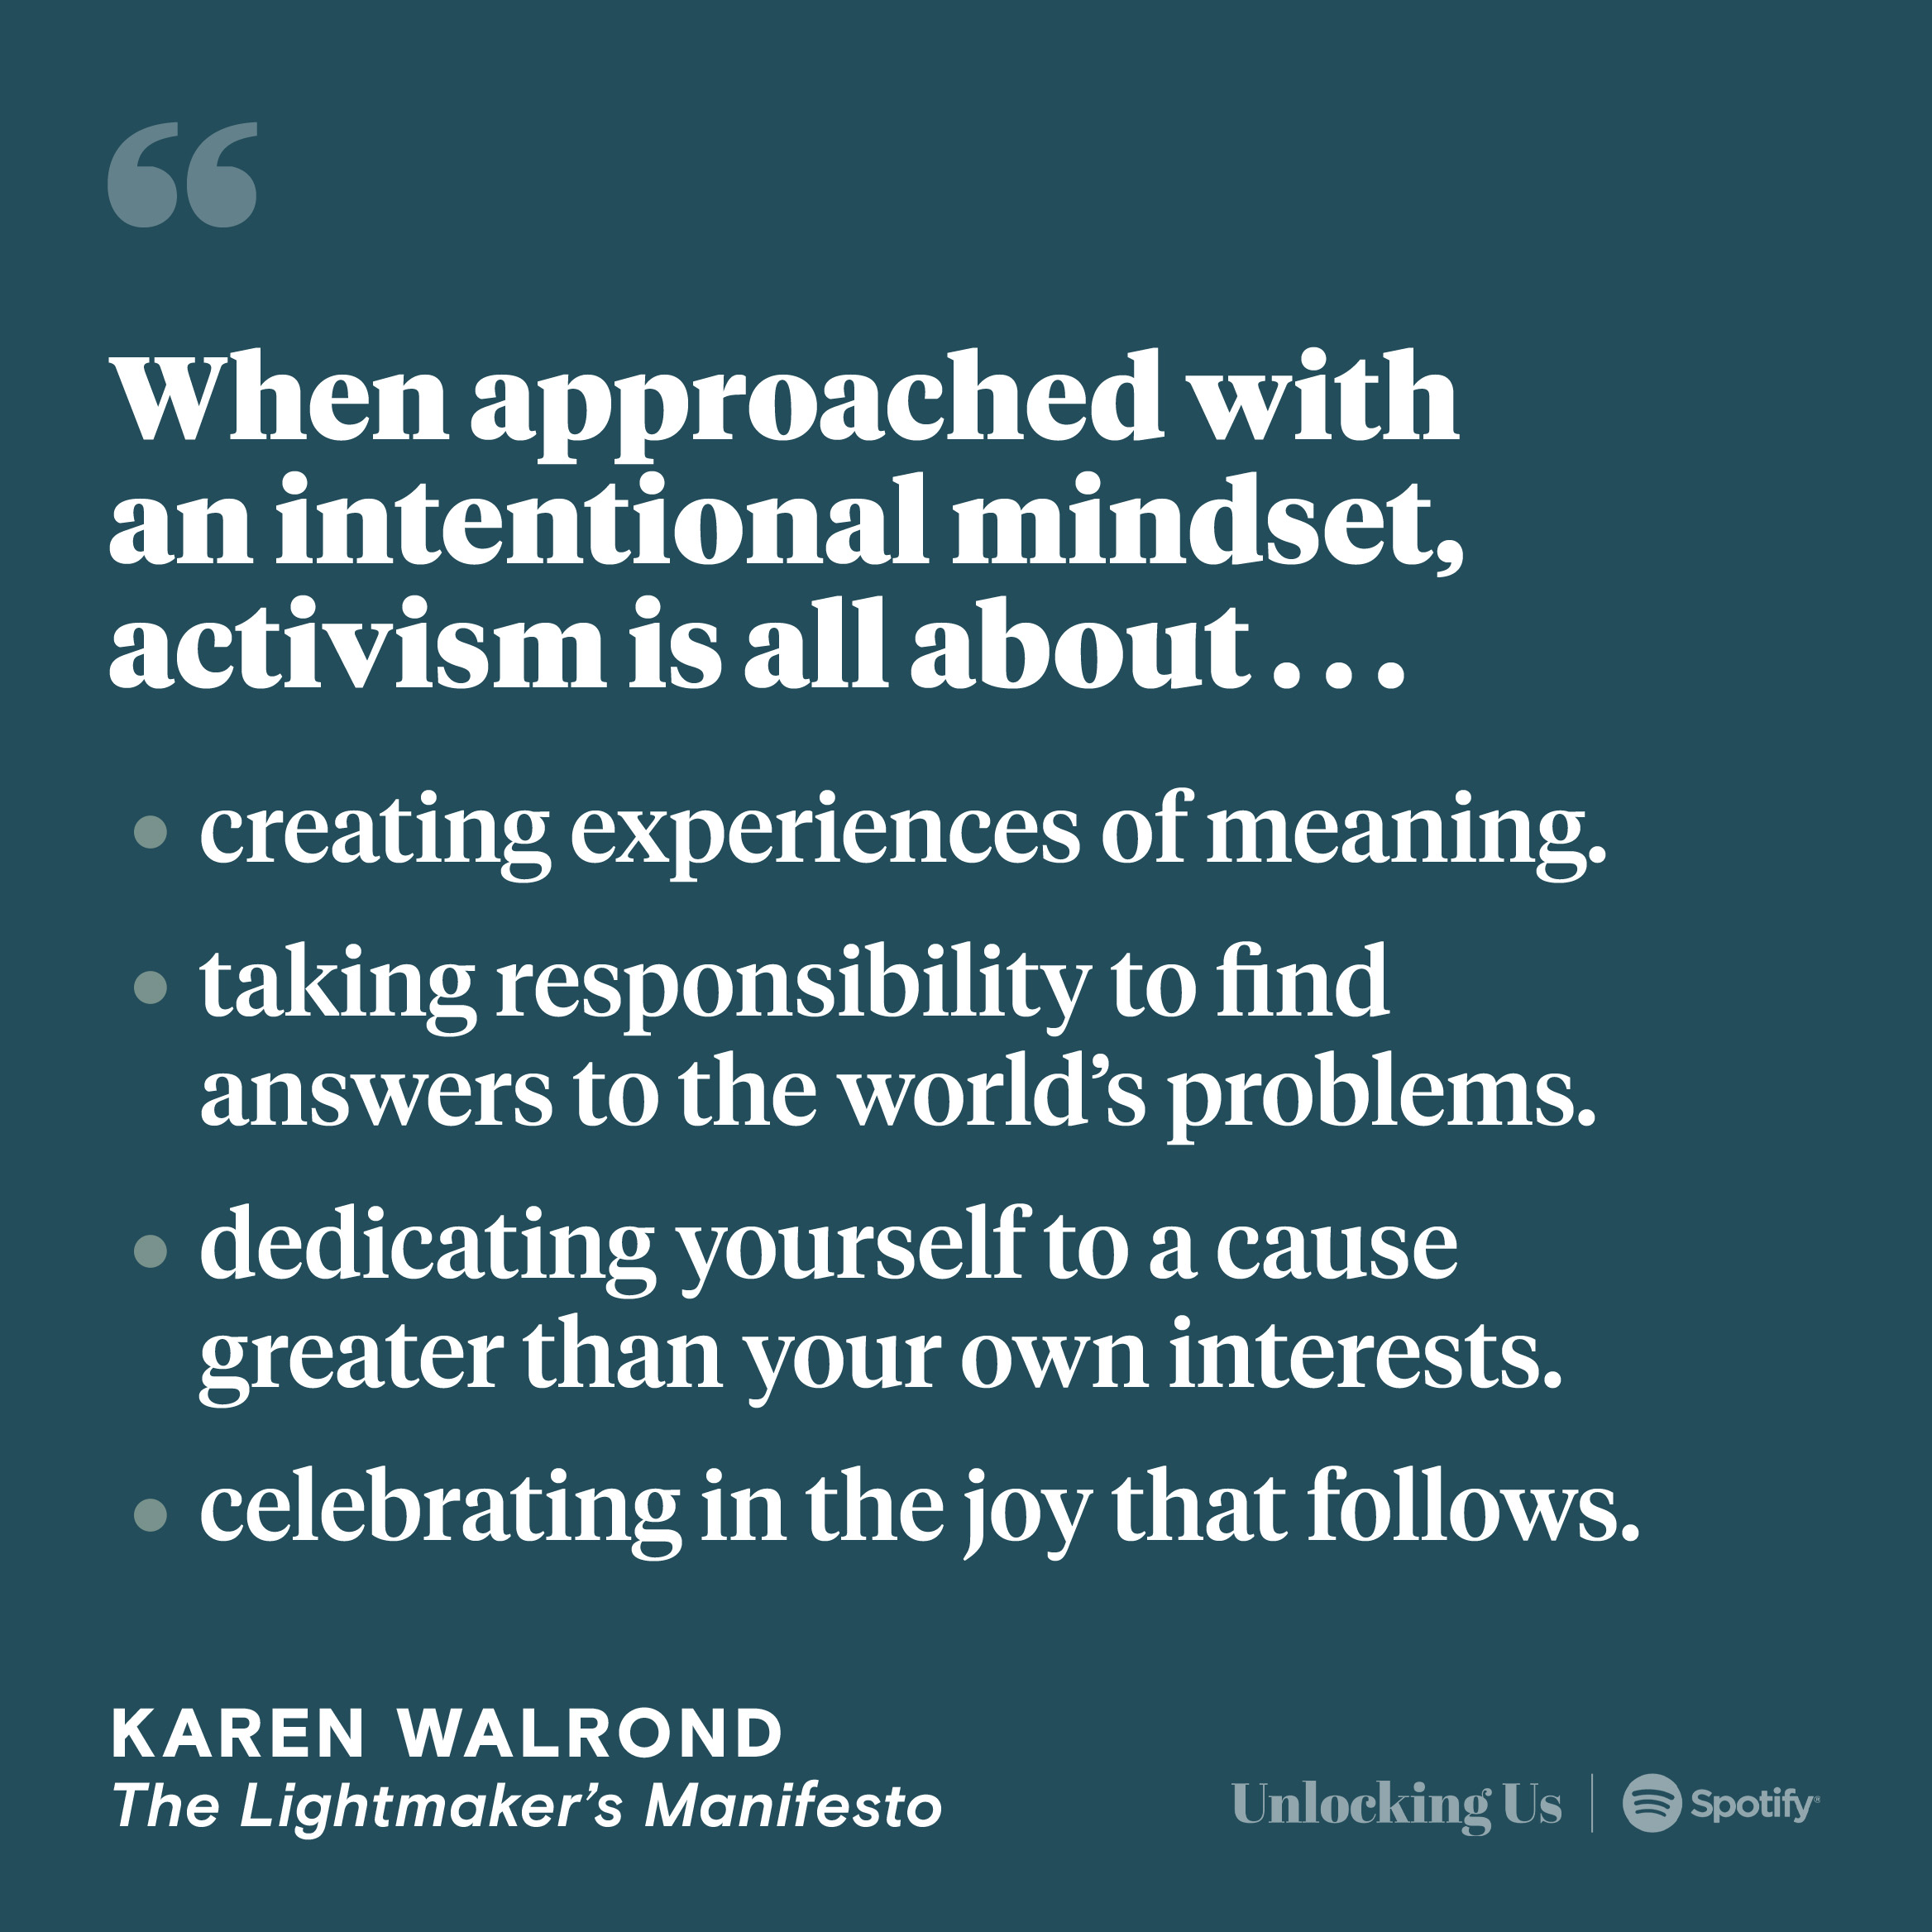 A quote from The Lightmaker’s Manifesto, by Karen Walrond: When approached with an intentional mindset, activism is all about creating experiences of meaning, taking responsibility to find answers to the world’s problems, dedicating yourself to a cause greater than your own interests, and celebrating in the joy that follows.